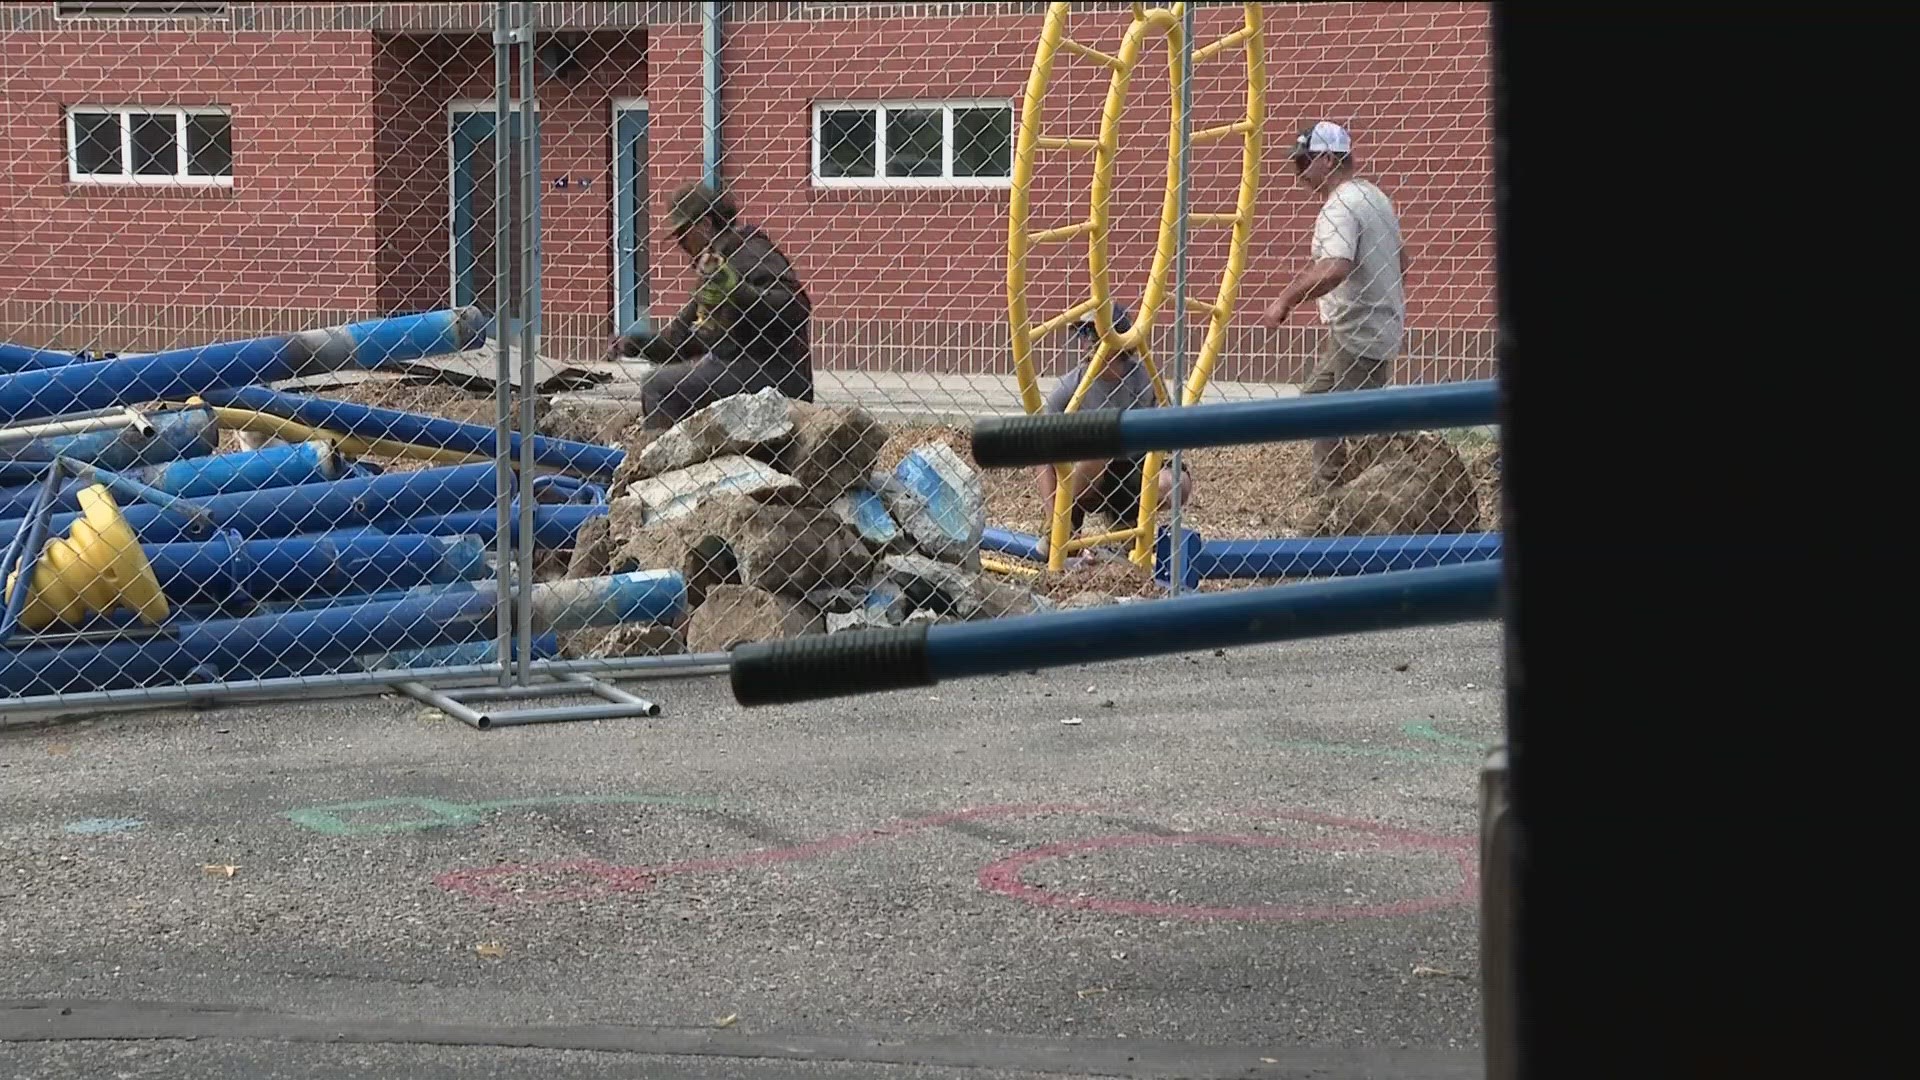 A complaint was filed alleging civil rights violations over the playgrounds for failing to comply with the Americans with Disabilities Act.